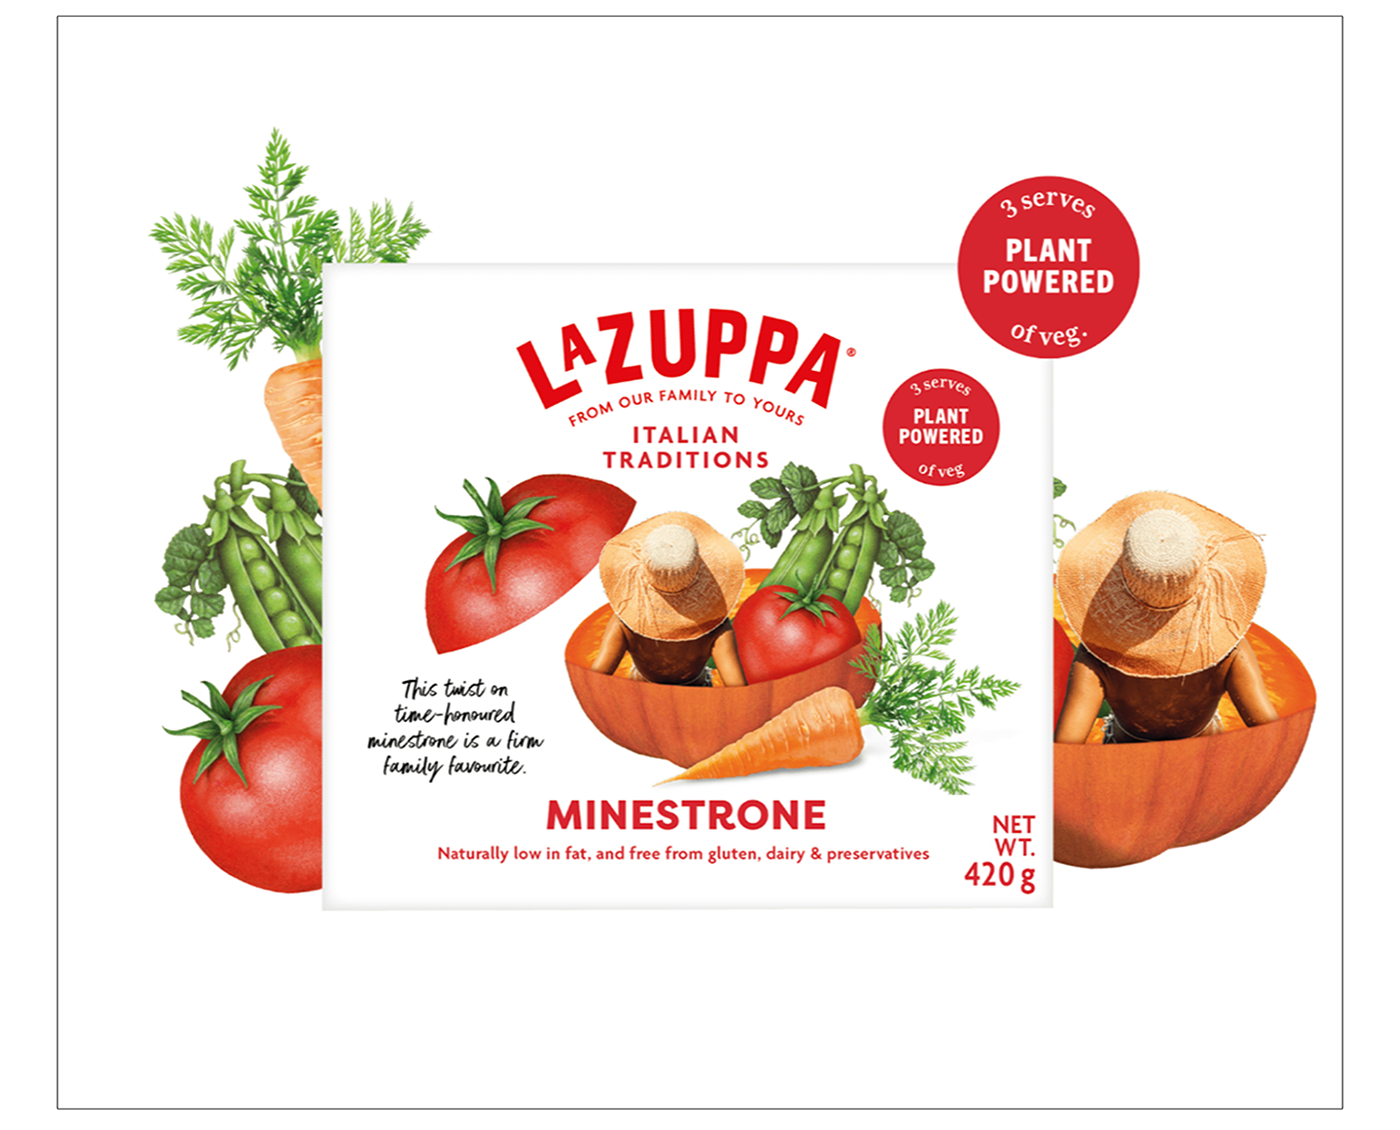 Tomato, pumpkin, and peas illustrations used on packaging for La Zuppa Minestrone soup.